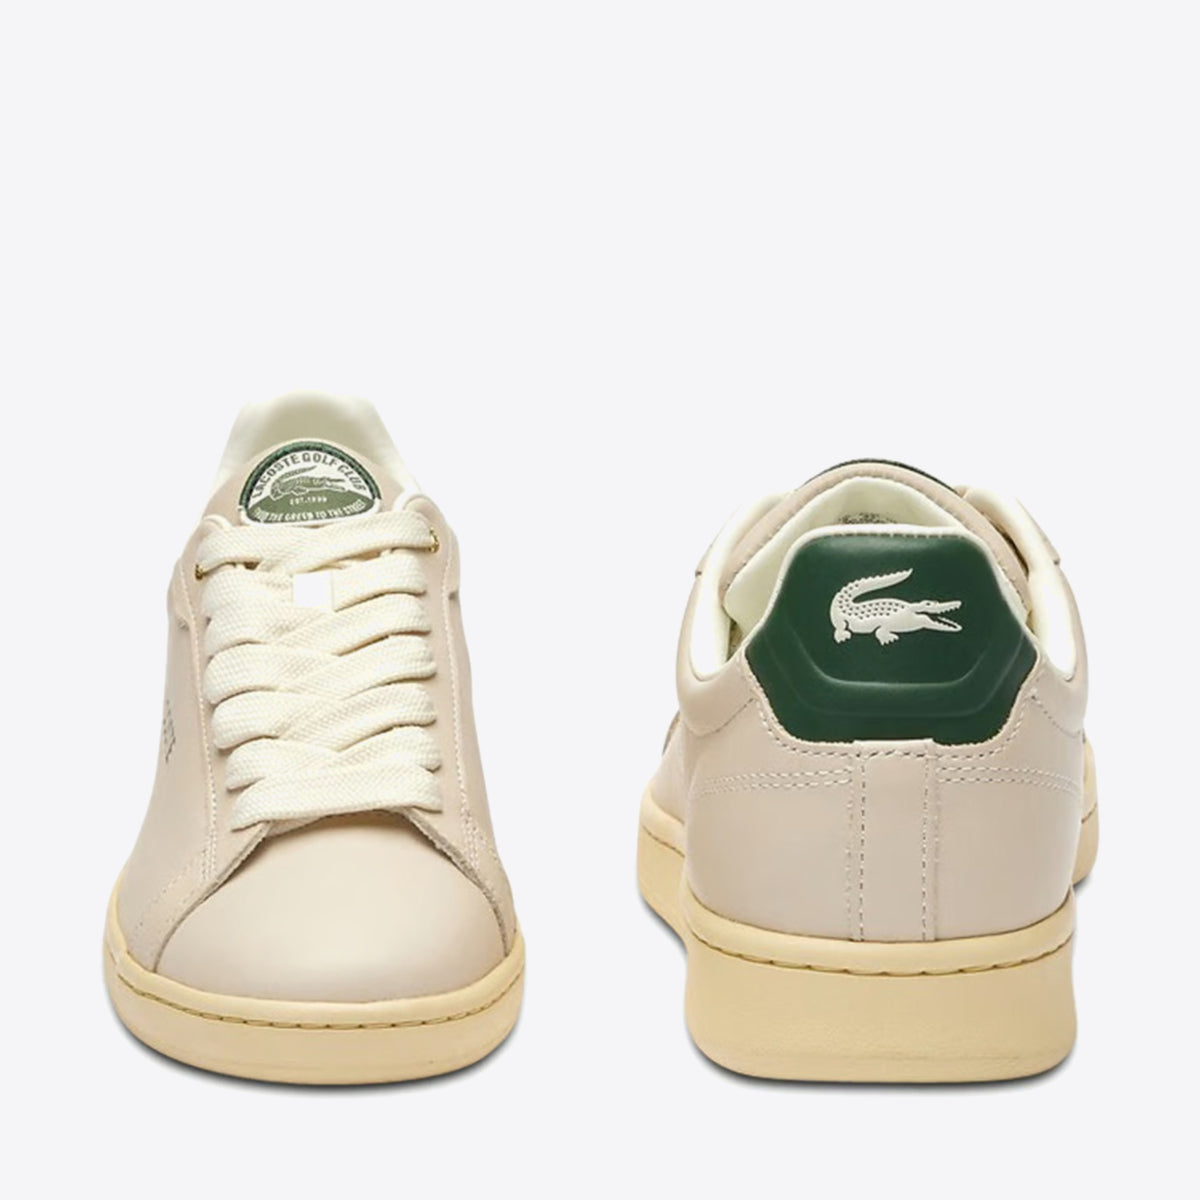 LACOSTE Carnaby Pro 2235 Off White/Green - Image 4